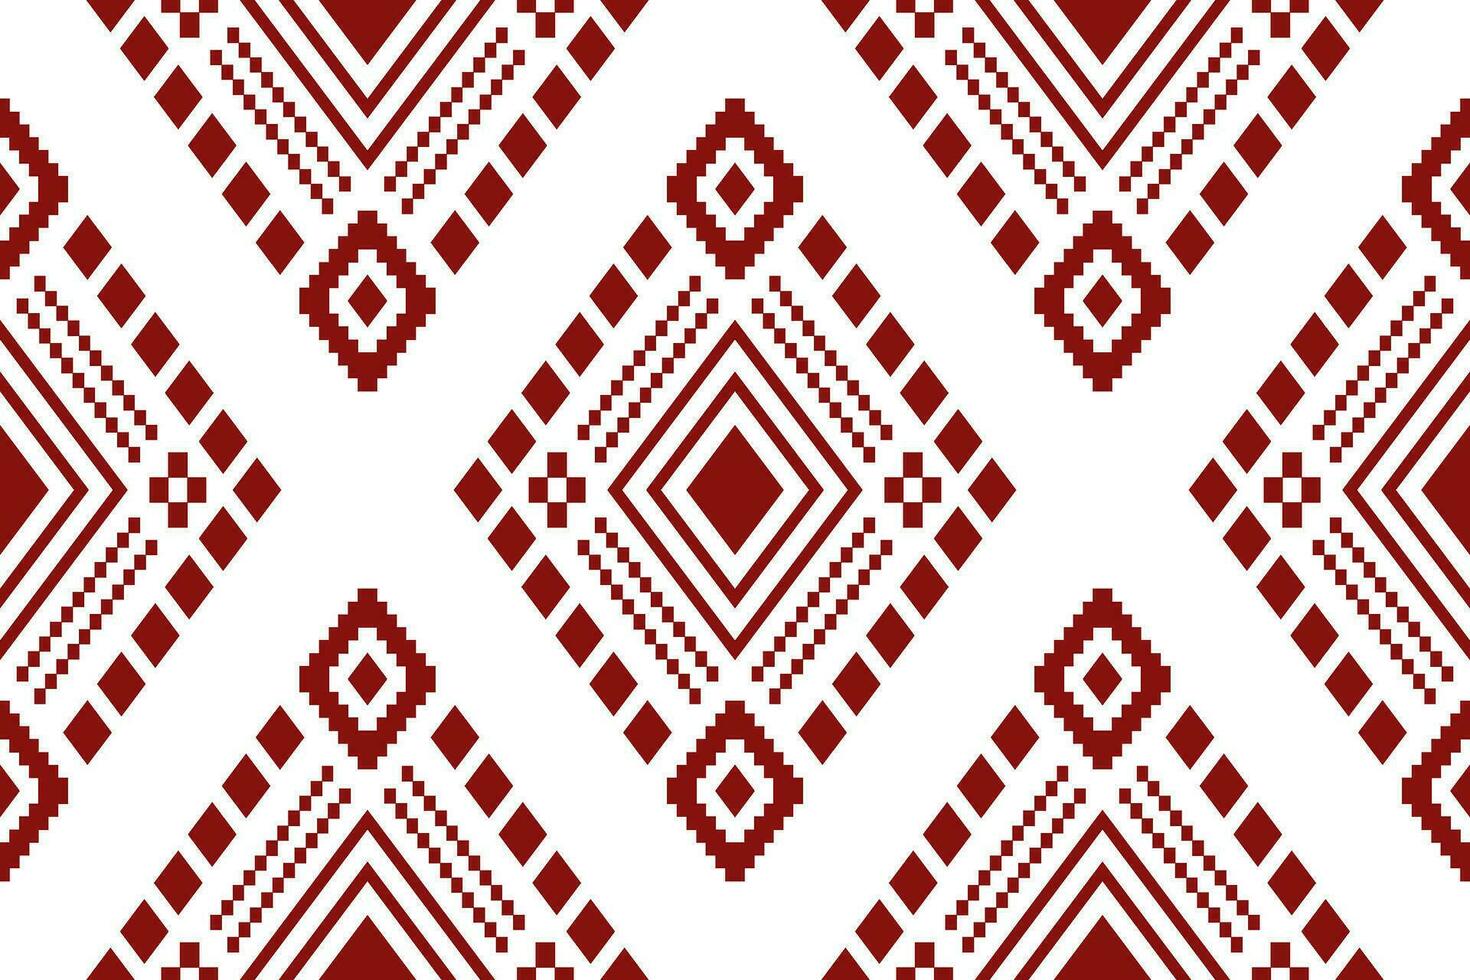 Cross stitch colorful geometric traditional ethnic pattern Ikat seamless pattern abstract design for fabric print cloth dress carpet curtains and sarong Aztec African Indian Indonesian vector